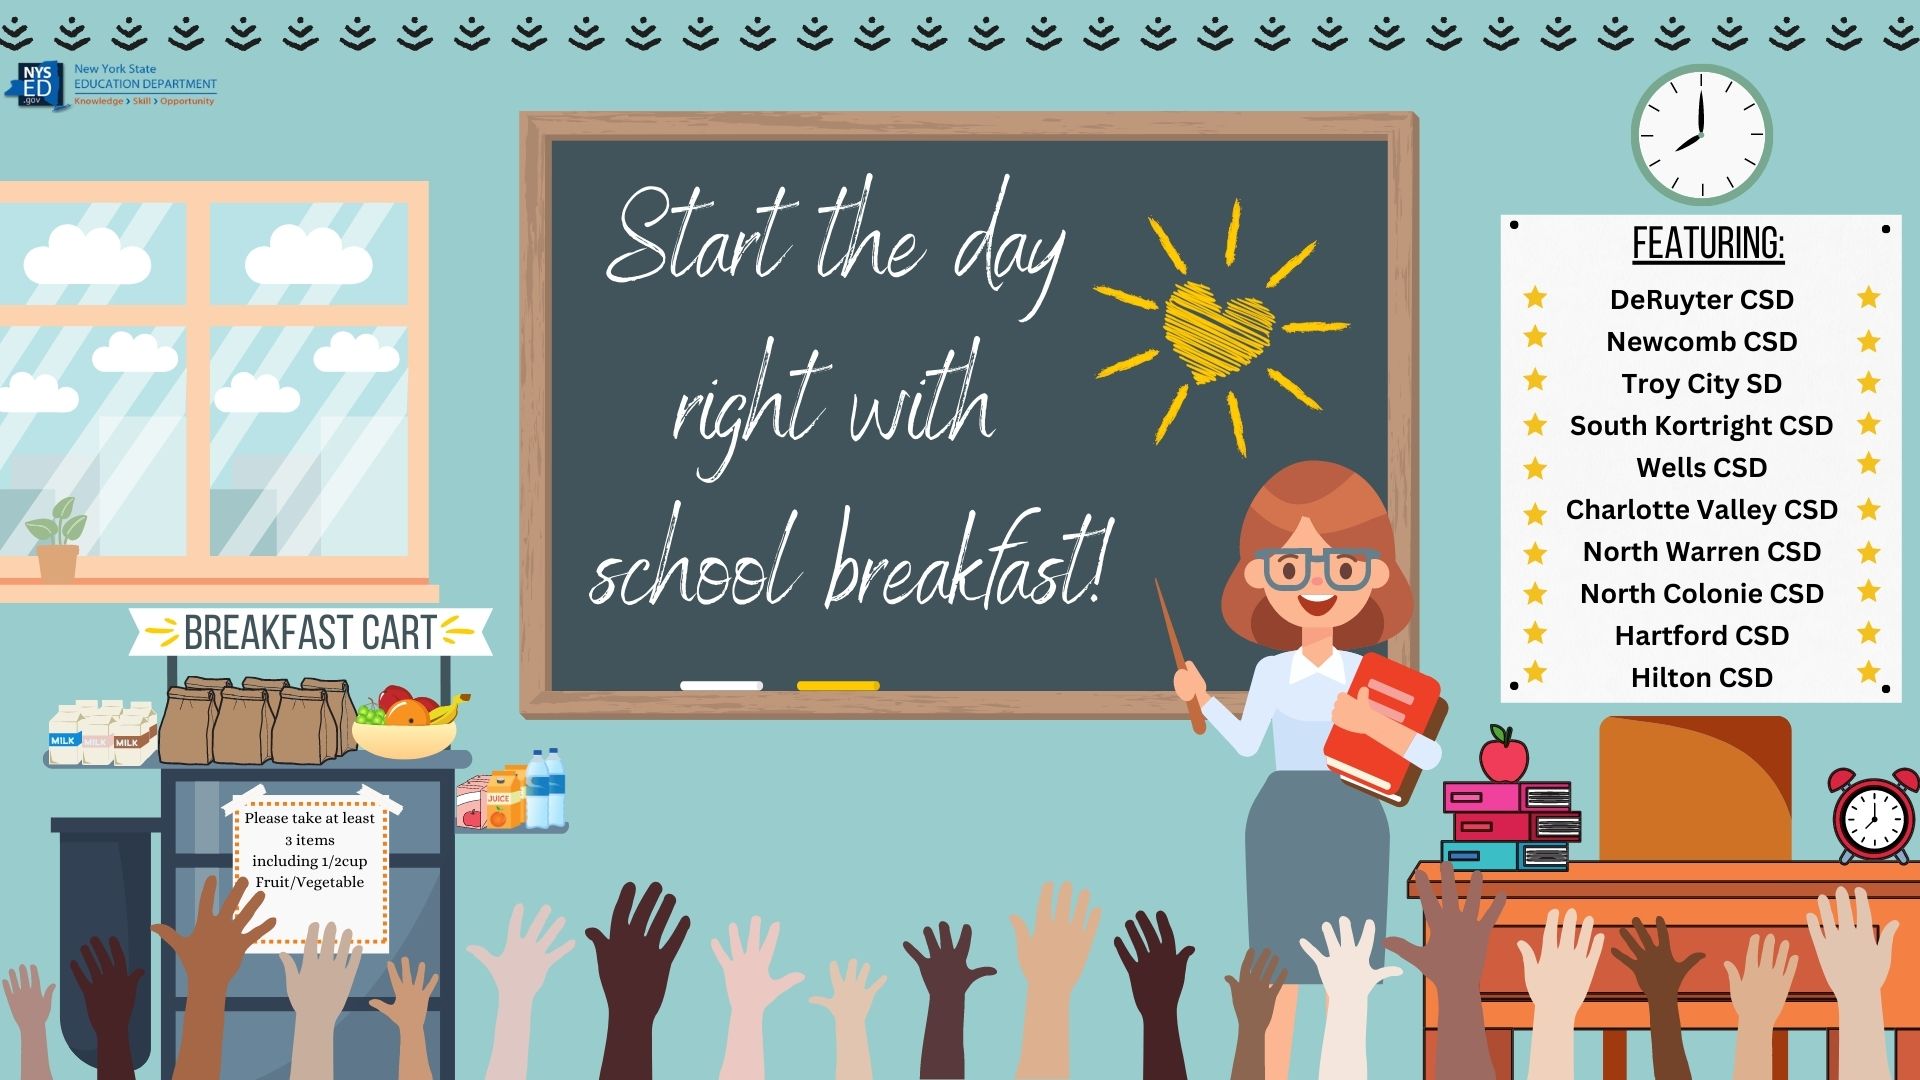 Start the day right with school breakfast!